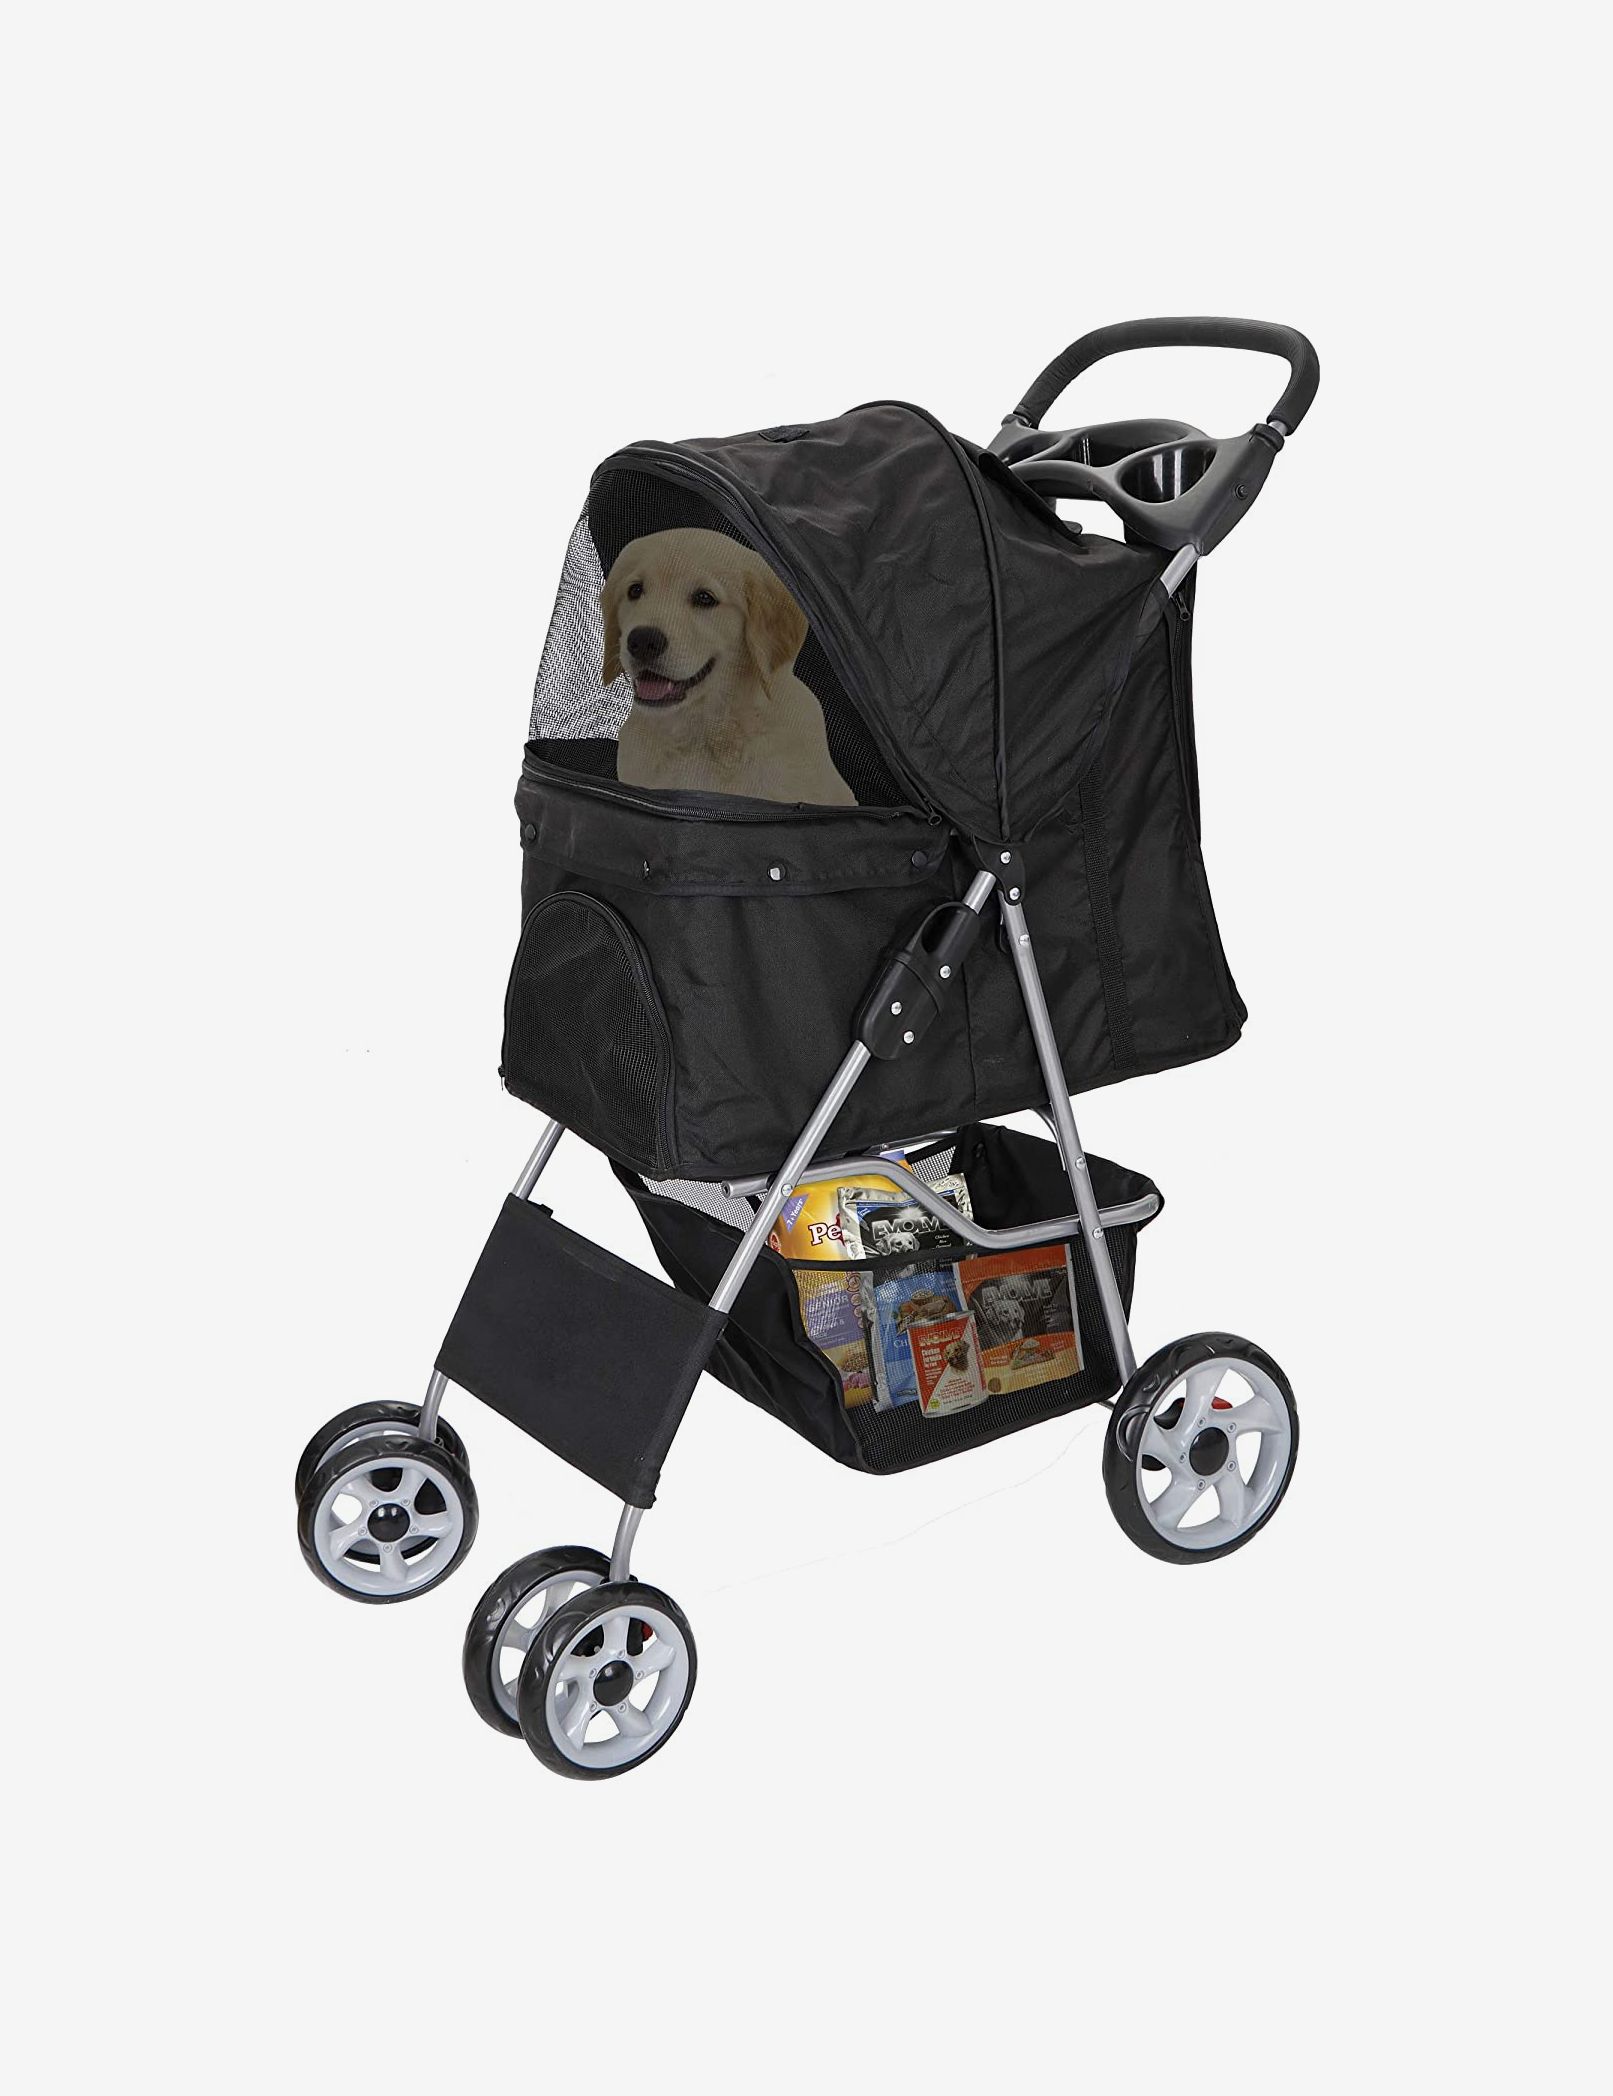 12 Best Dog Carriers 2023